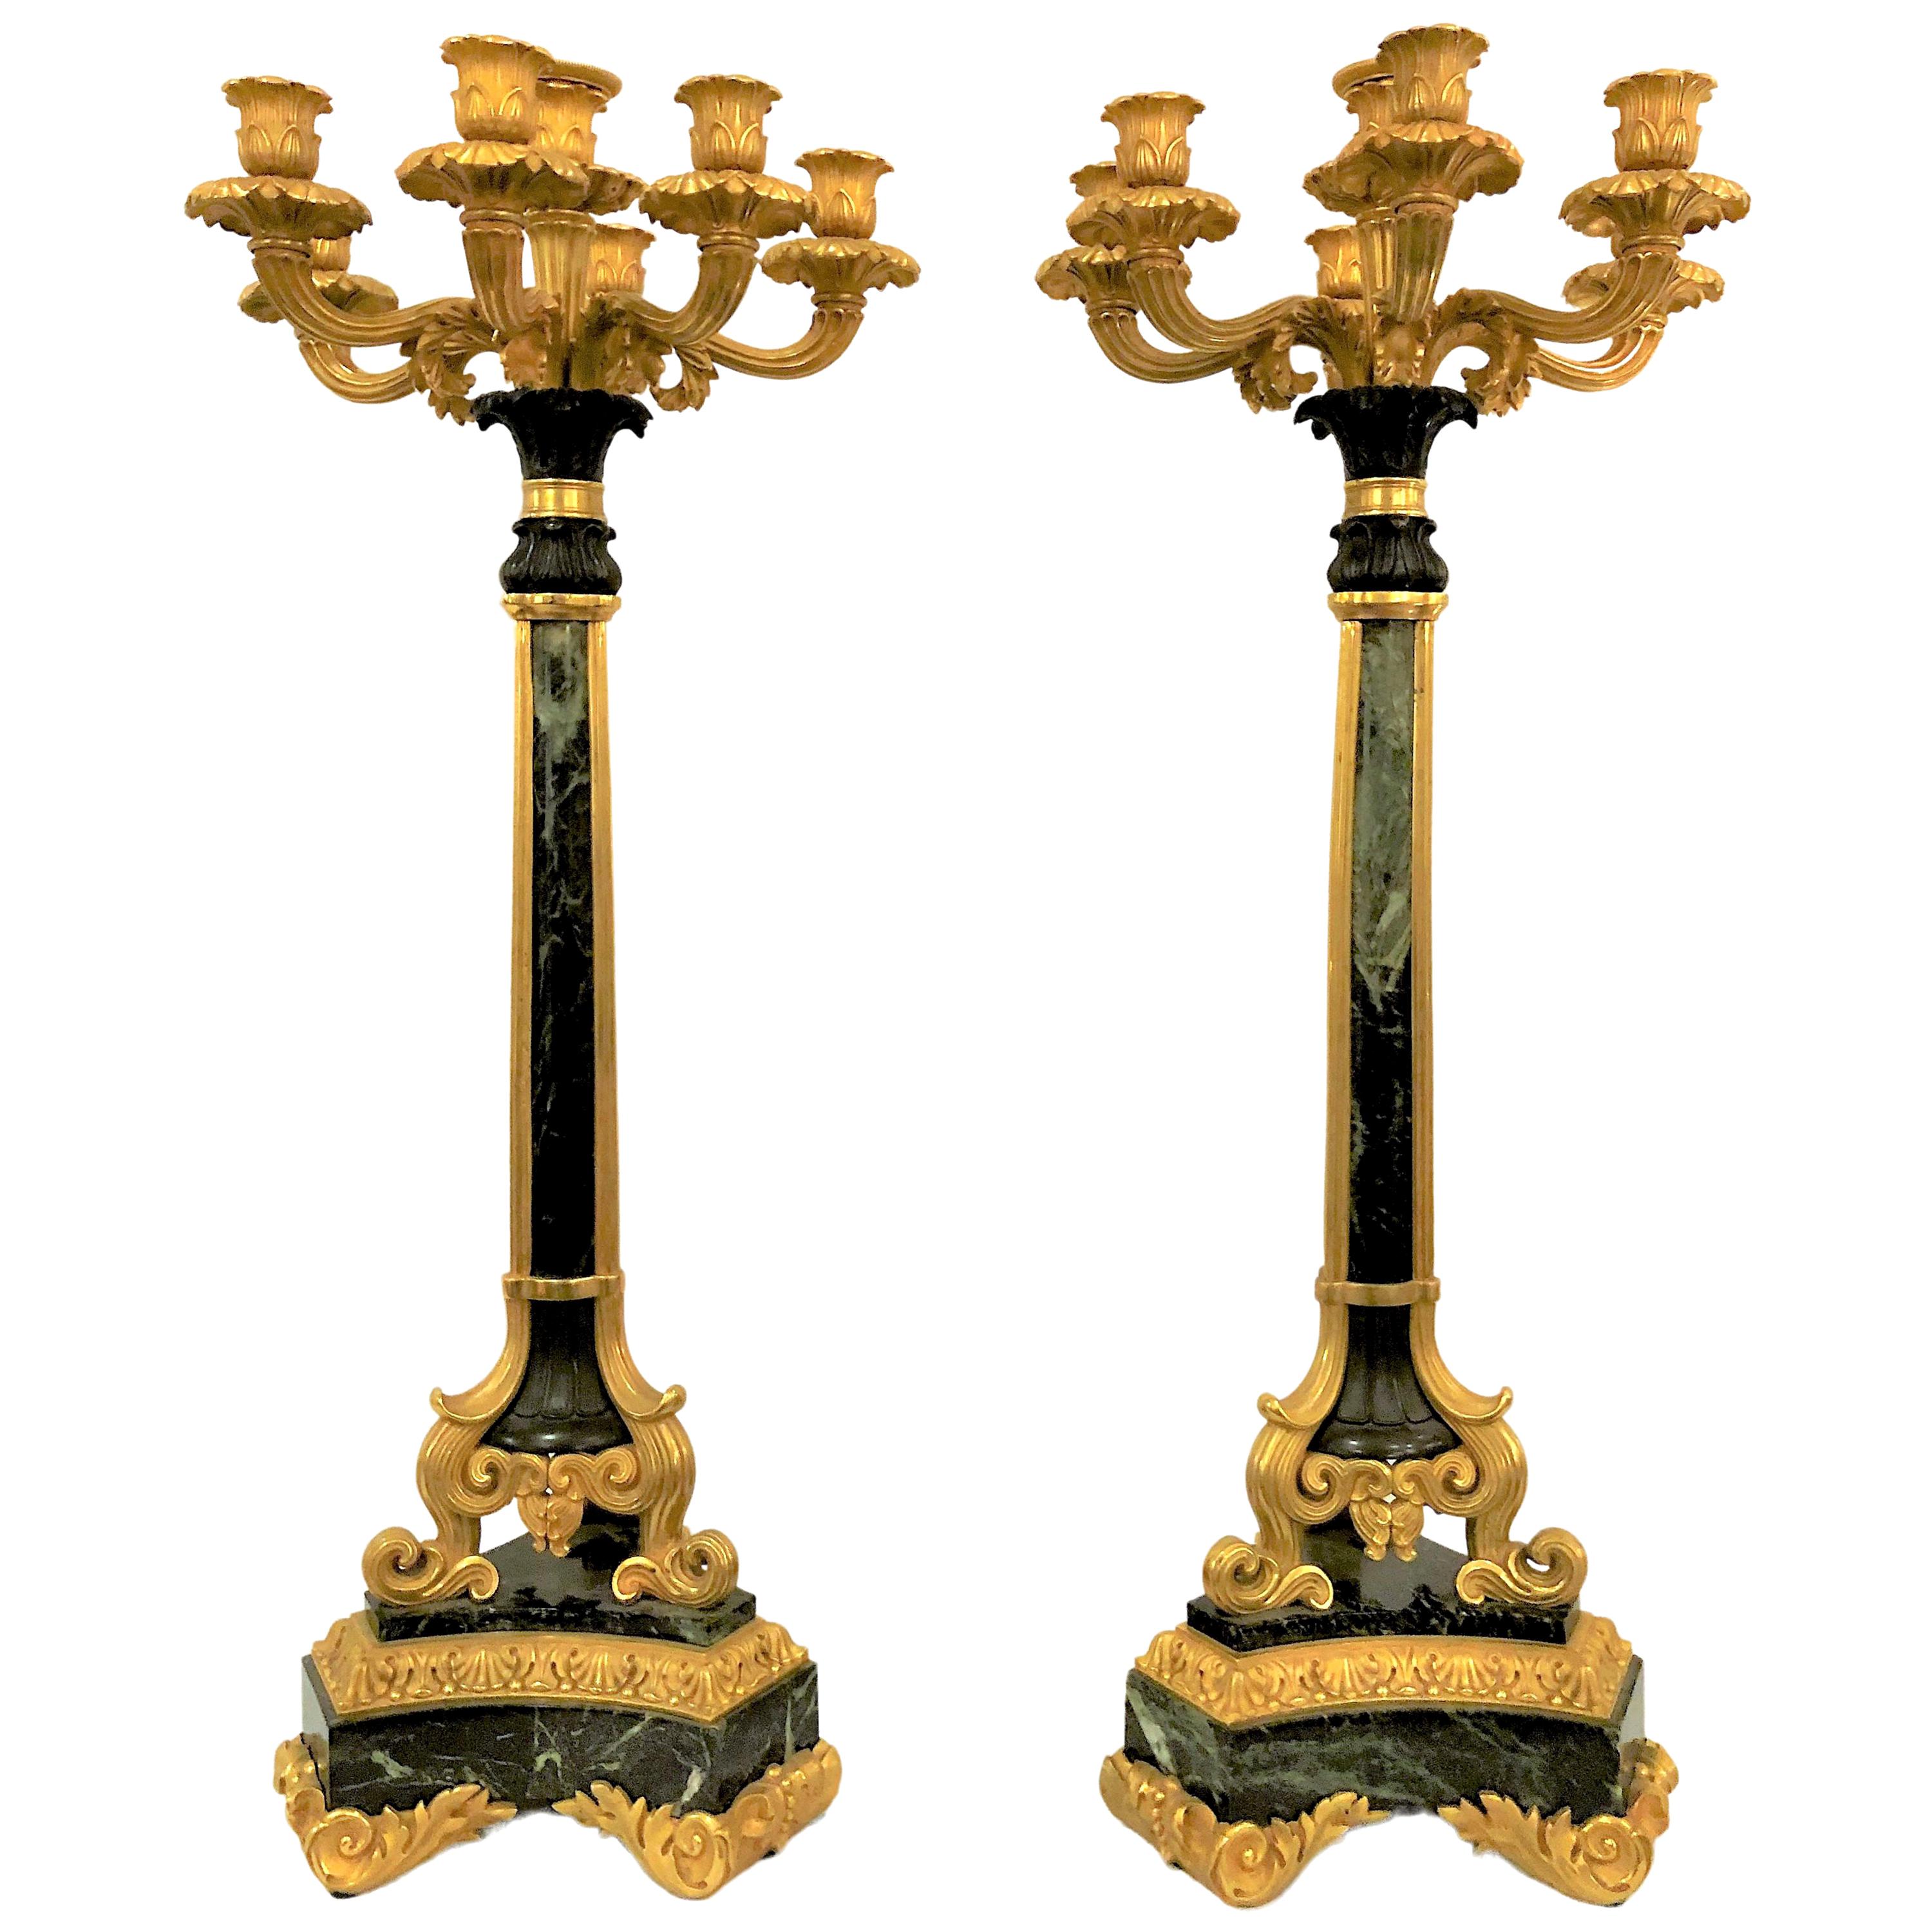 Pair of Antique French Empire Marble and Bronze D'ore Candelabra